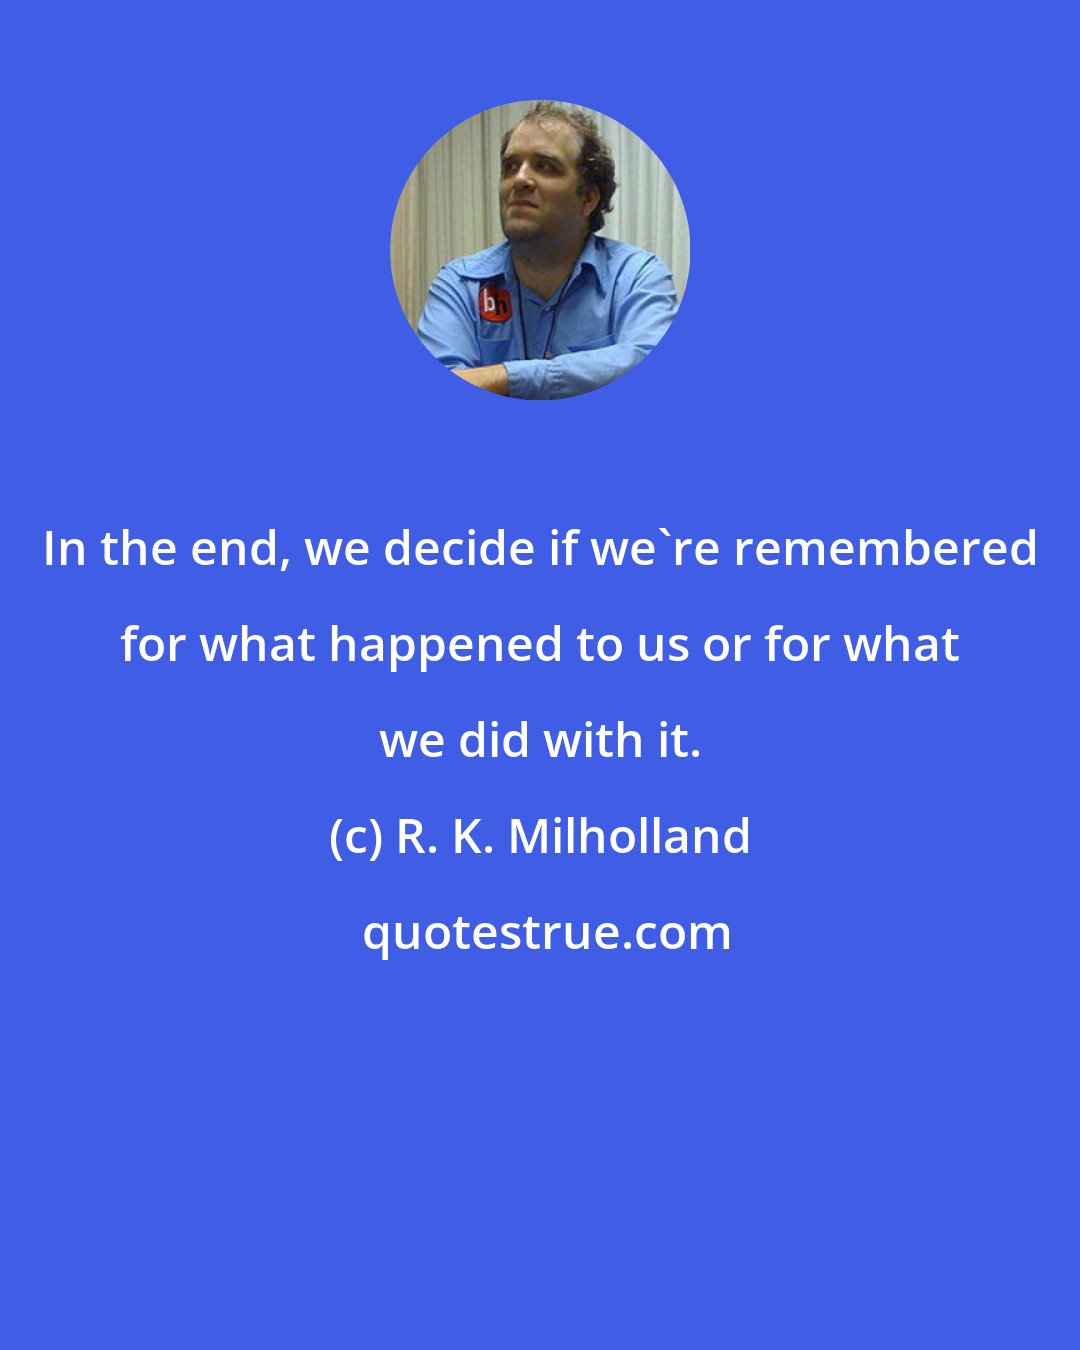 R. K. Milholland: In the end, we decide if we're remembered for what happened to us or for what we did with it.